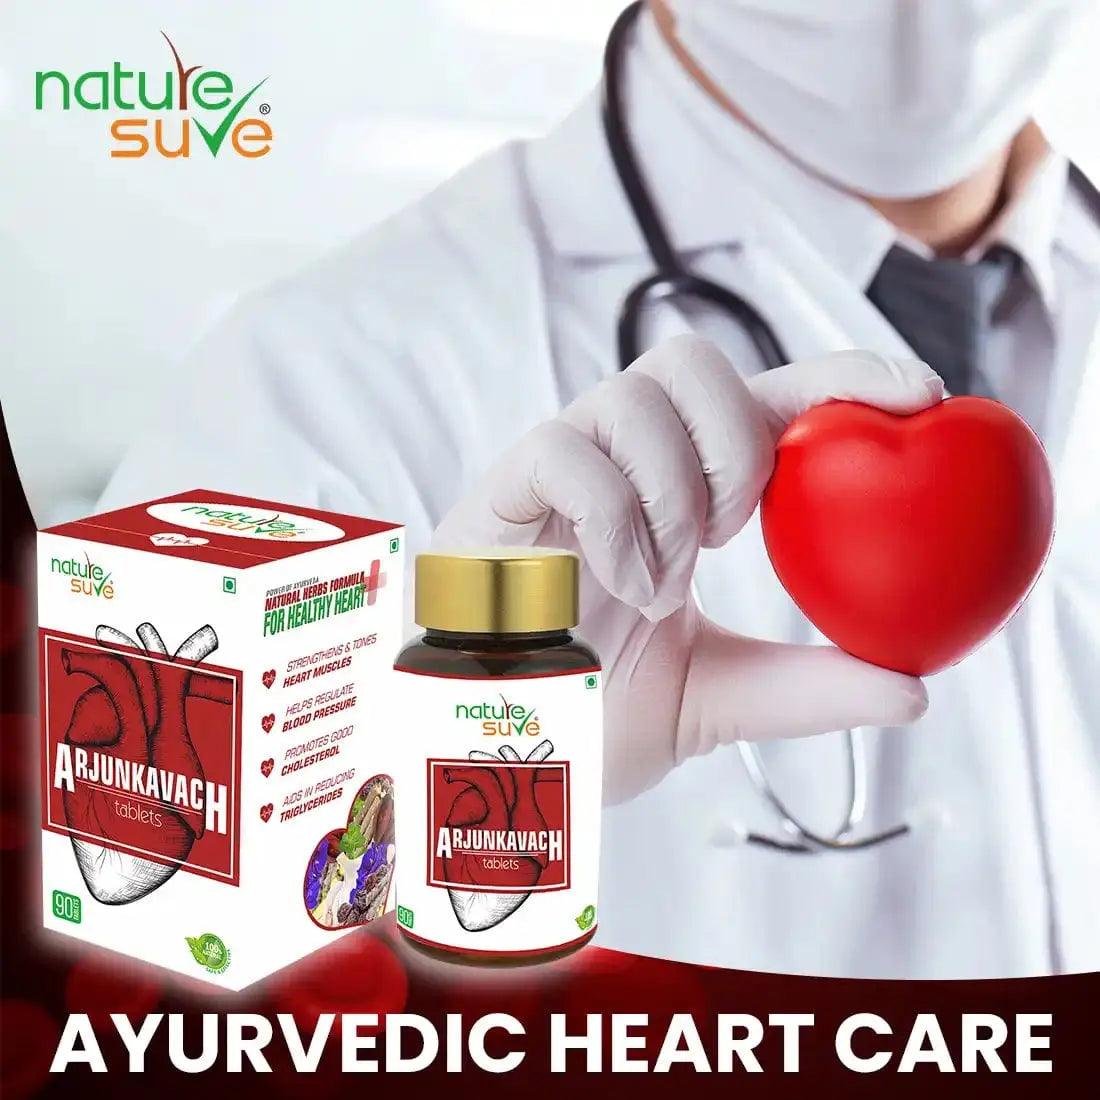 Nature Sure Arjun Kavach Tablets for Healthy Heart in Men and Women Are A Premium Ayurvedic Formulation